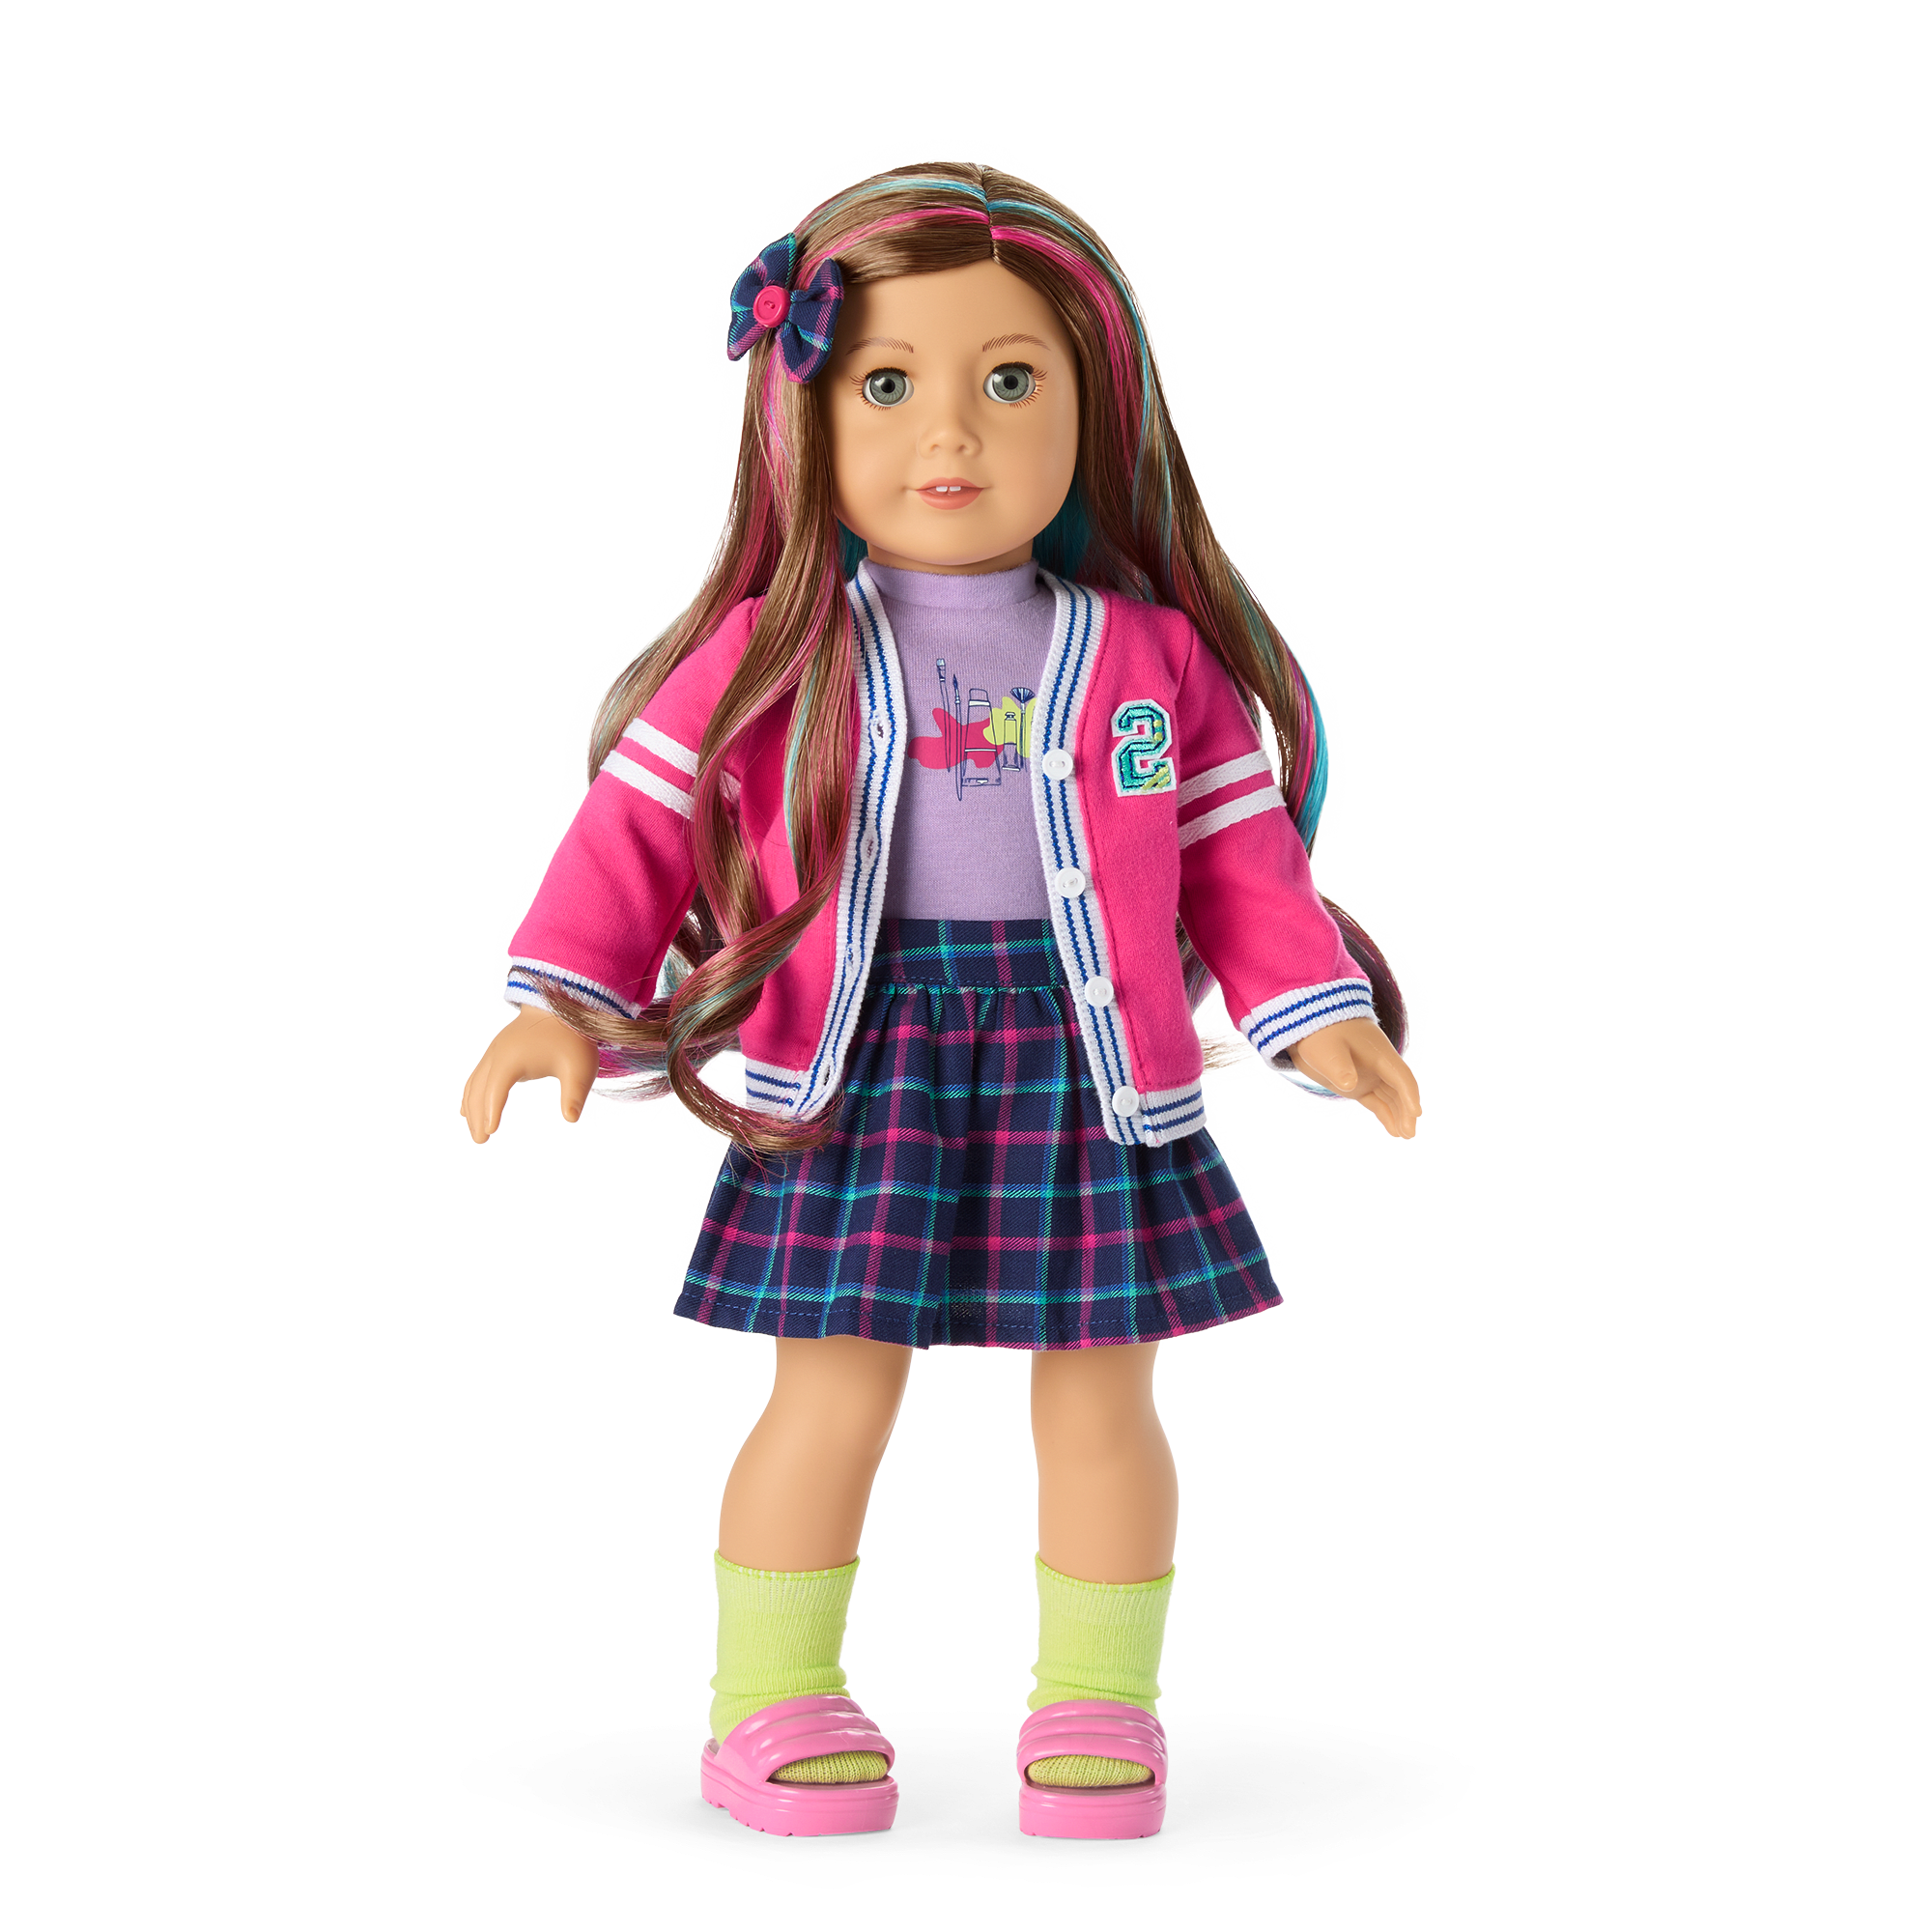 School-Day Style Outfit Set for 18-inch Dolls